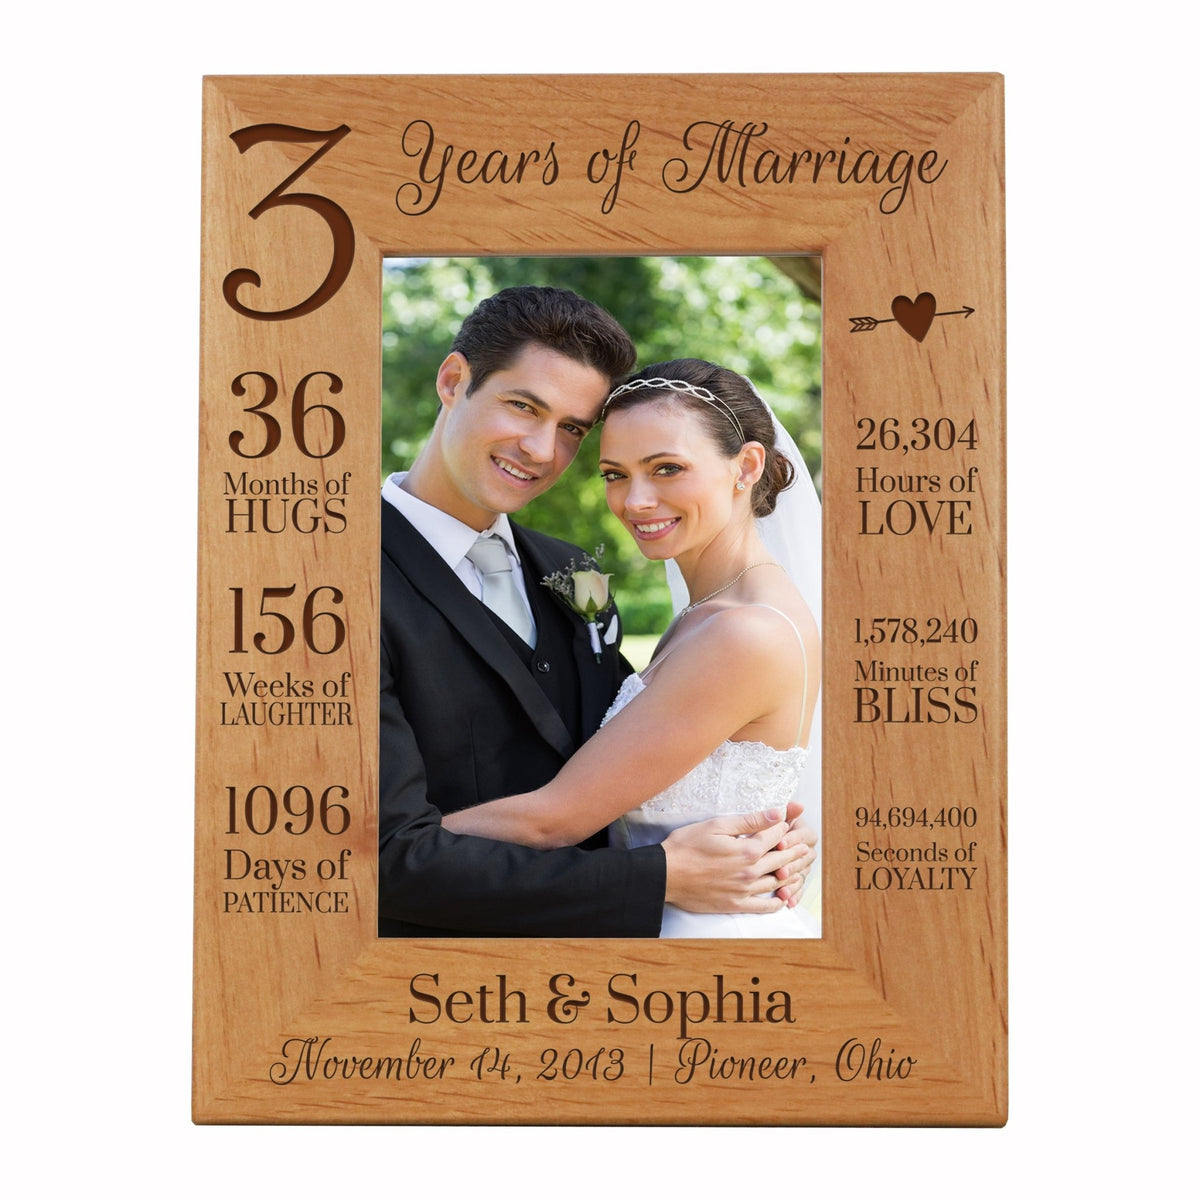 Personalized Engraved 3rd Anniversary Photo Frame - 7.5 x 9.5 - LifeSong Milestones